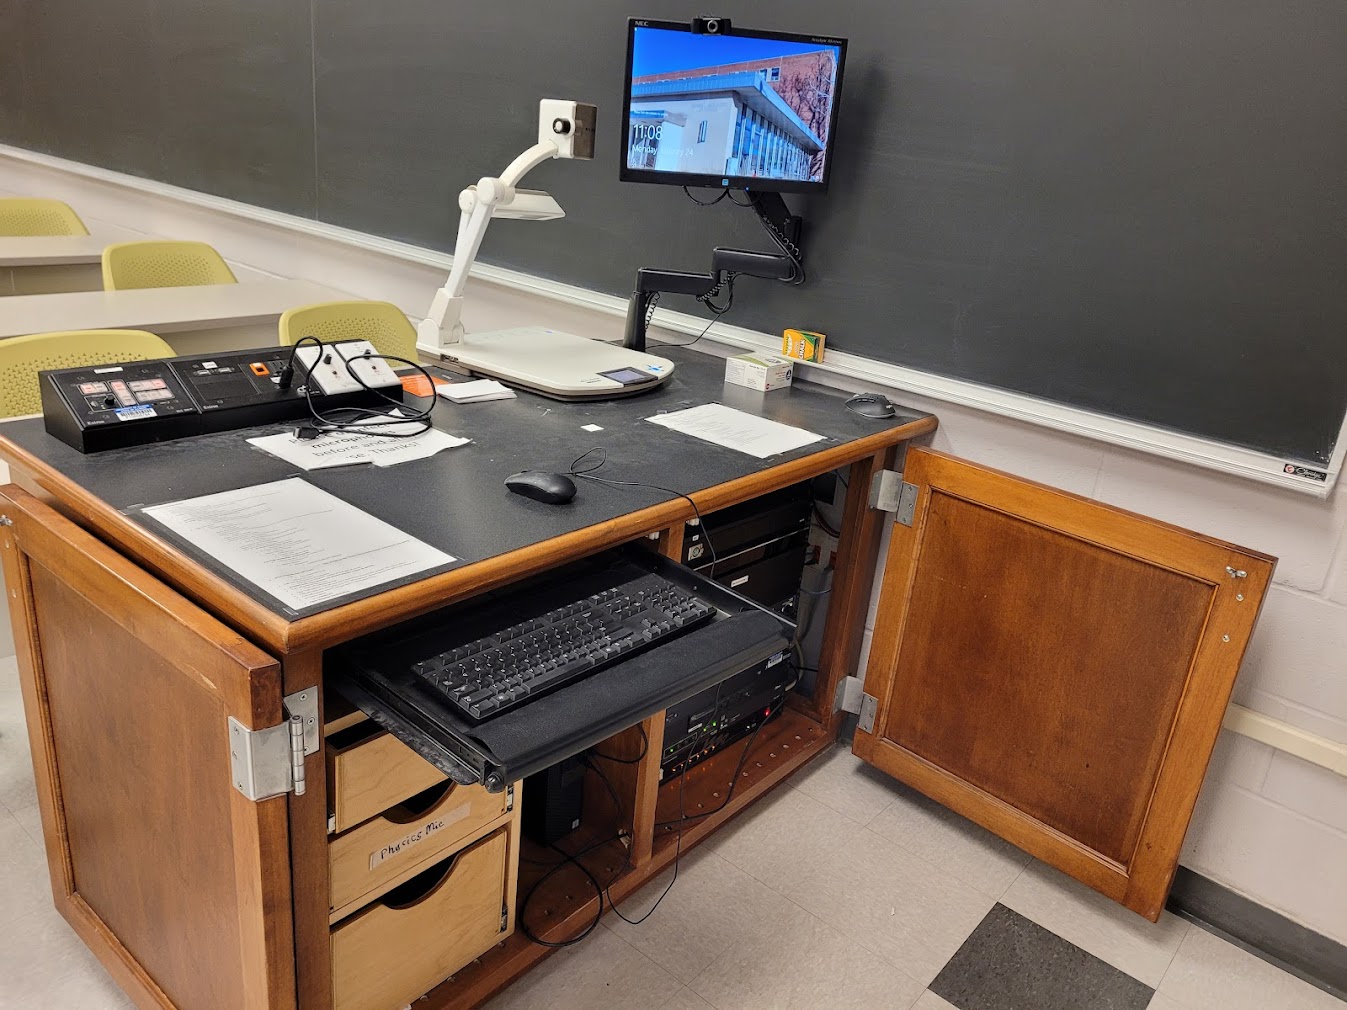 A view of the open cabinet with a computer monitor, HDMI input, a push button controller, document camera, and audio visual rack.